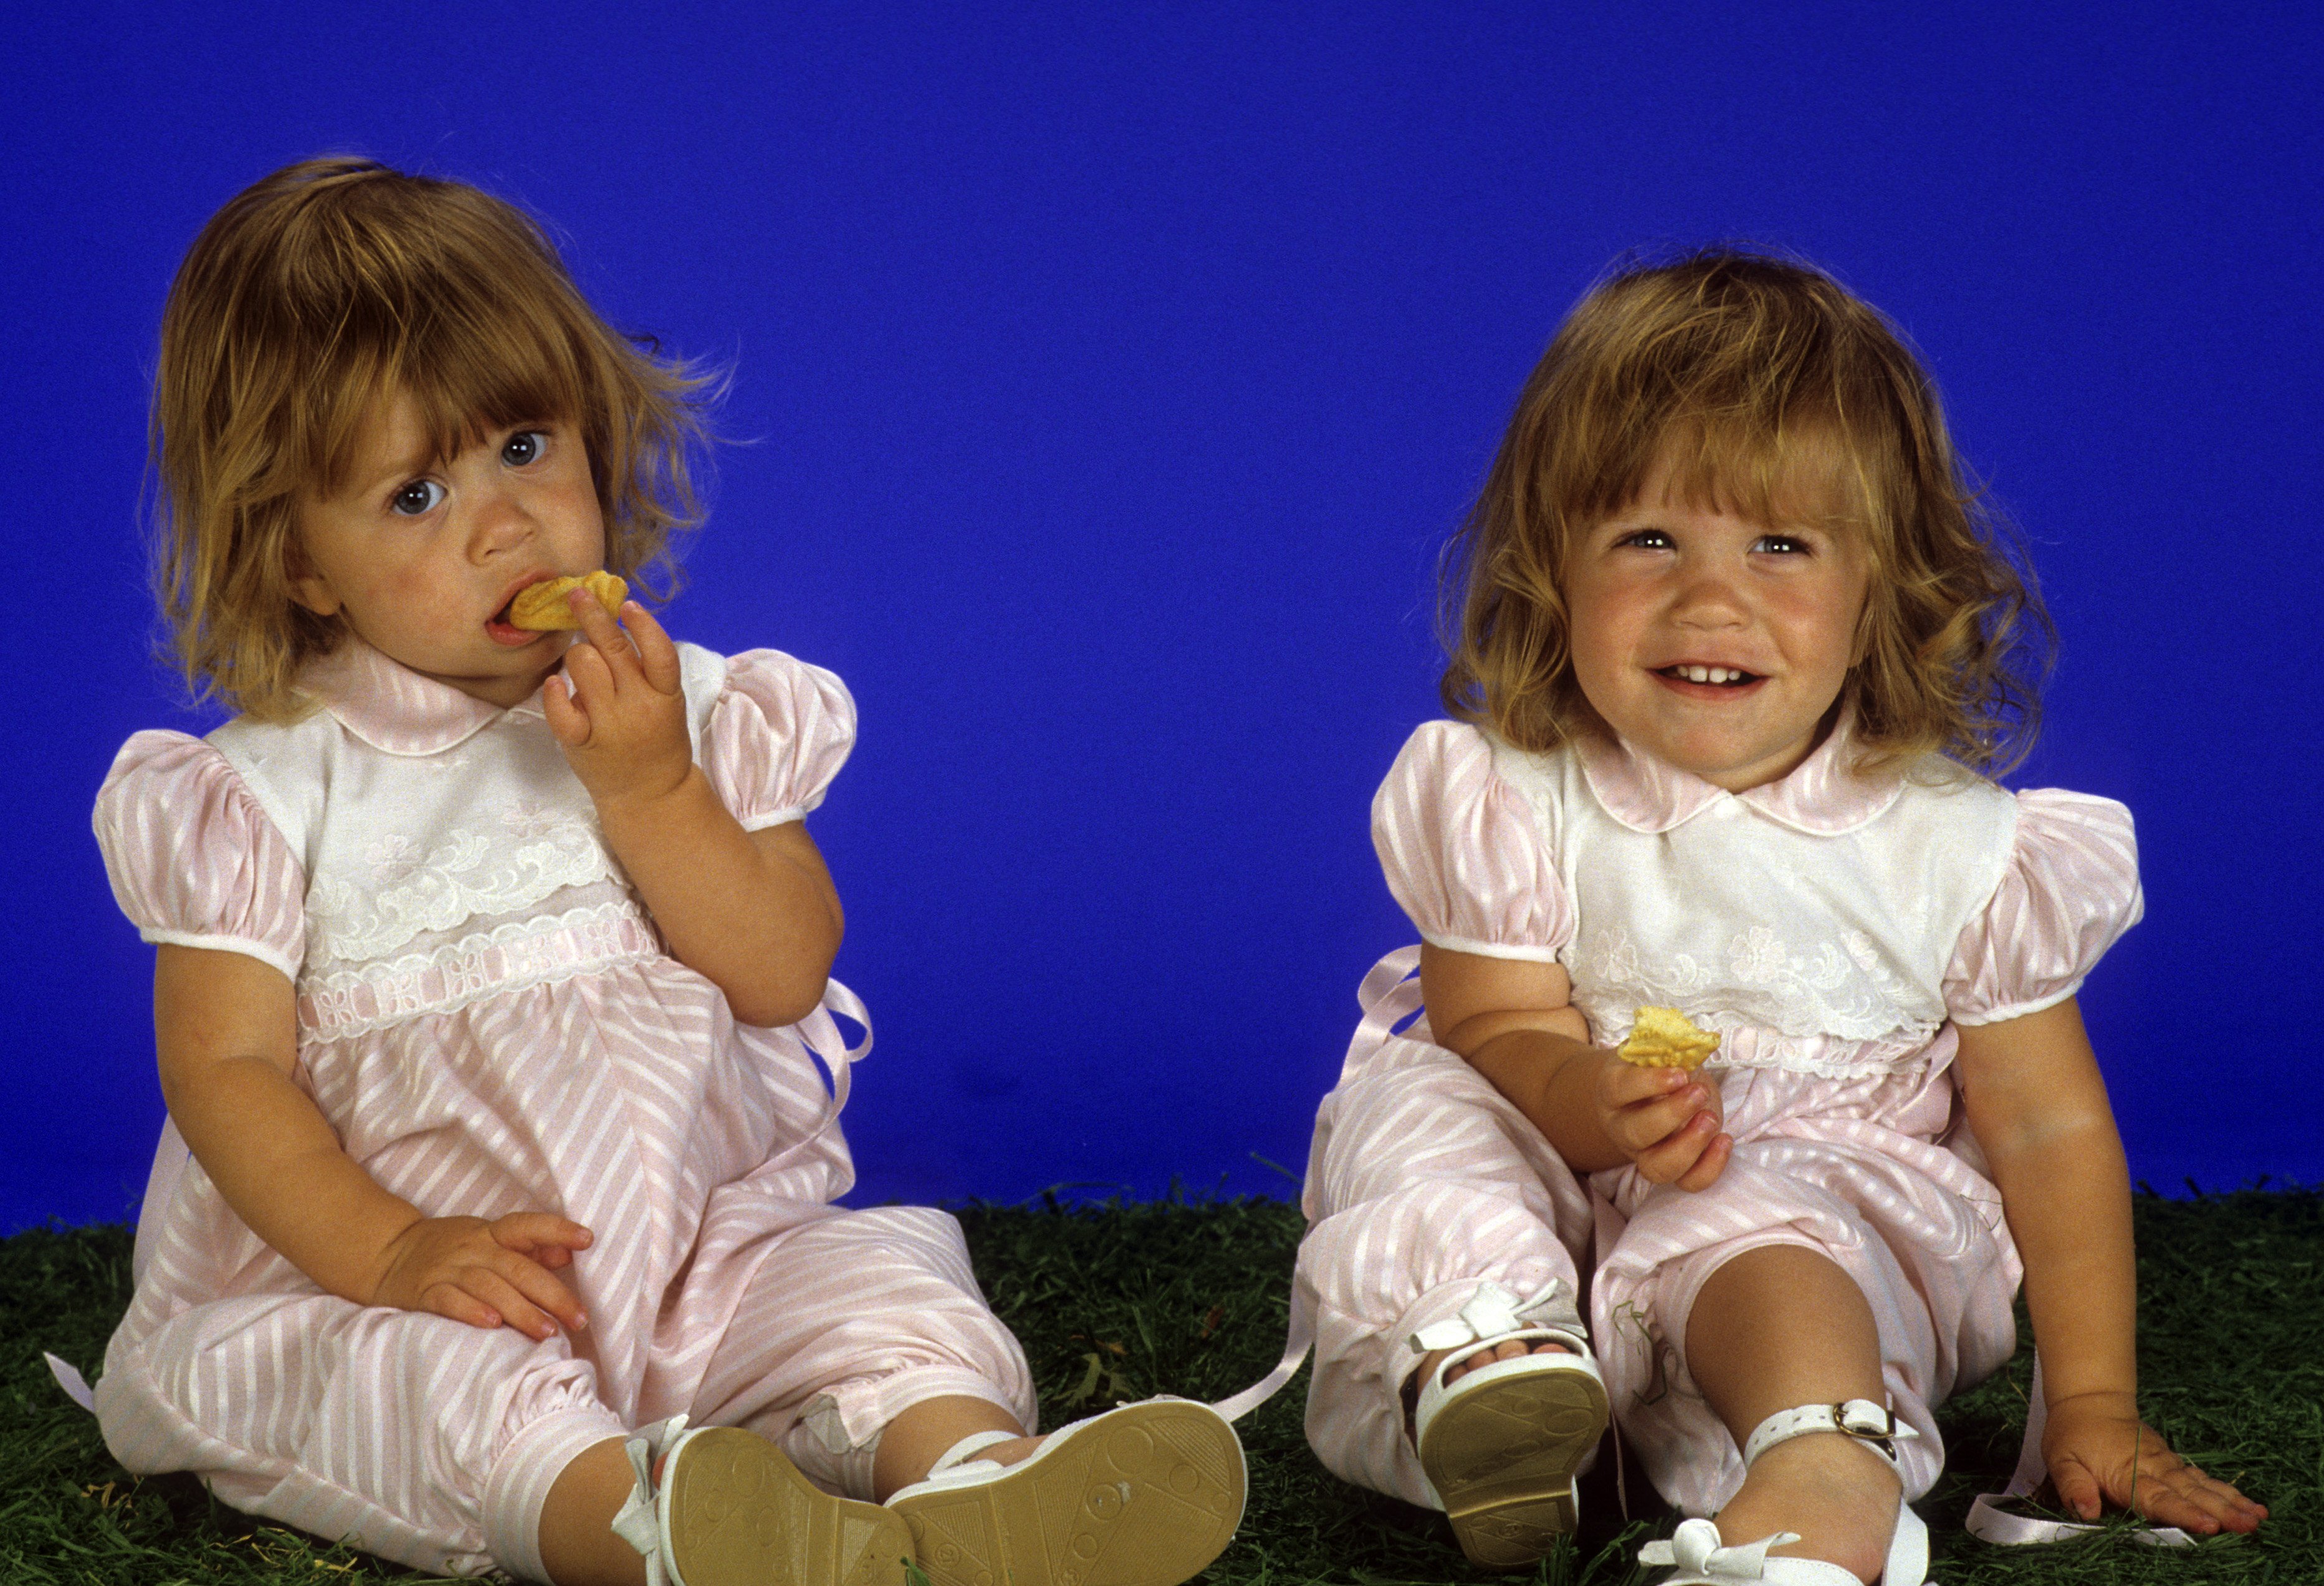 Mary-Kate and Ashley Olsen in a portrait session for "Full House" on April 11, 1988 | Source: Getty Images 